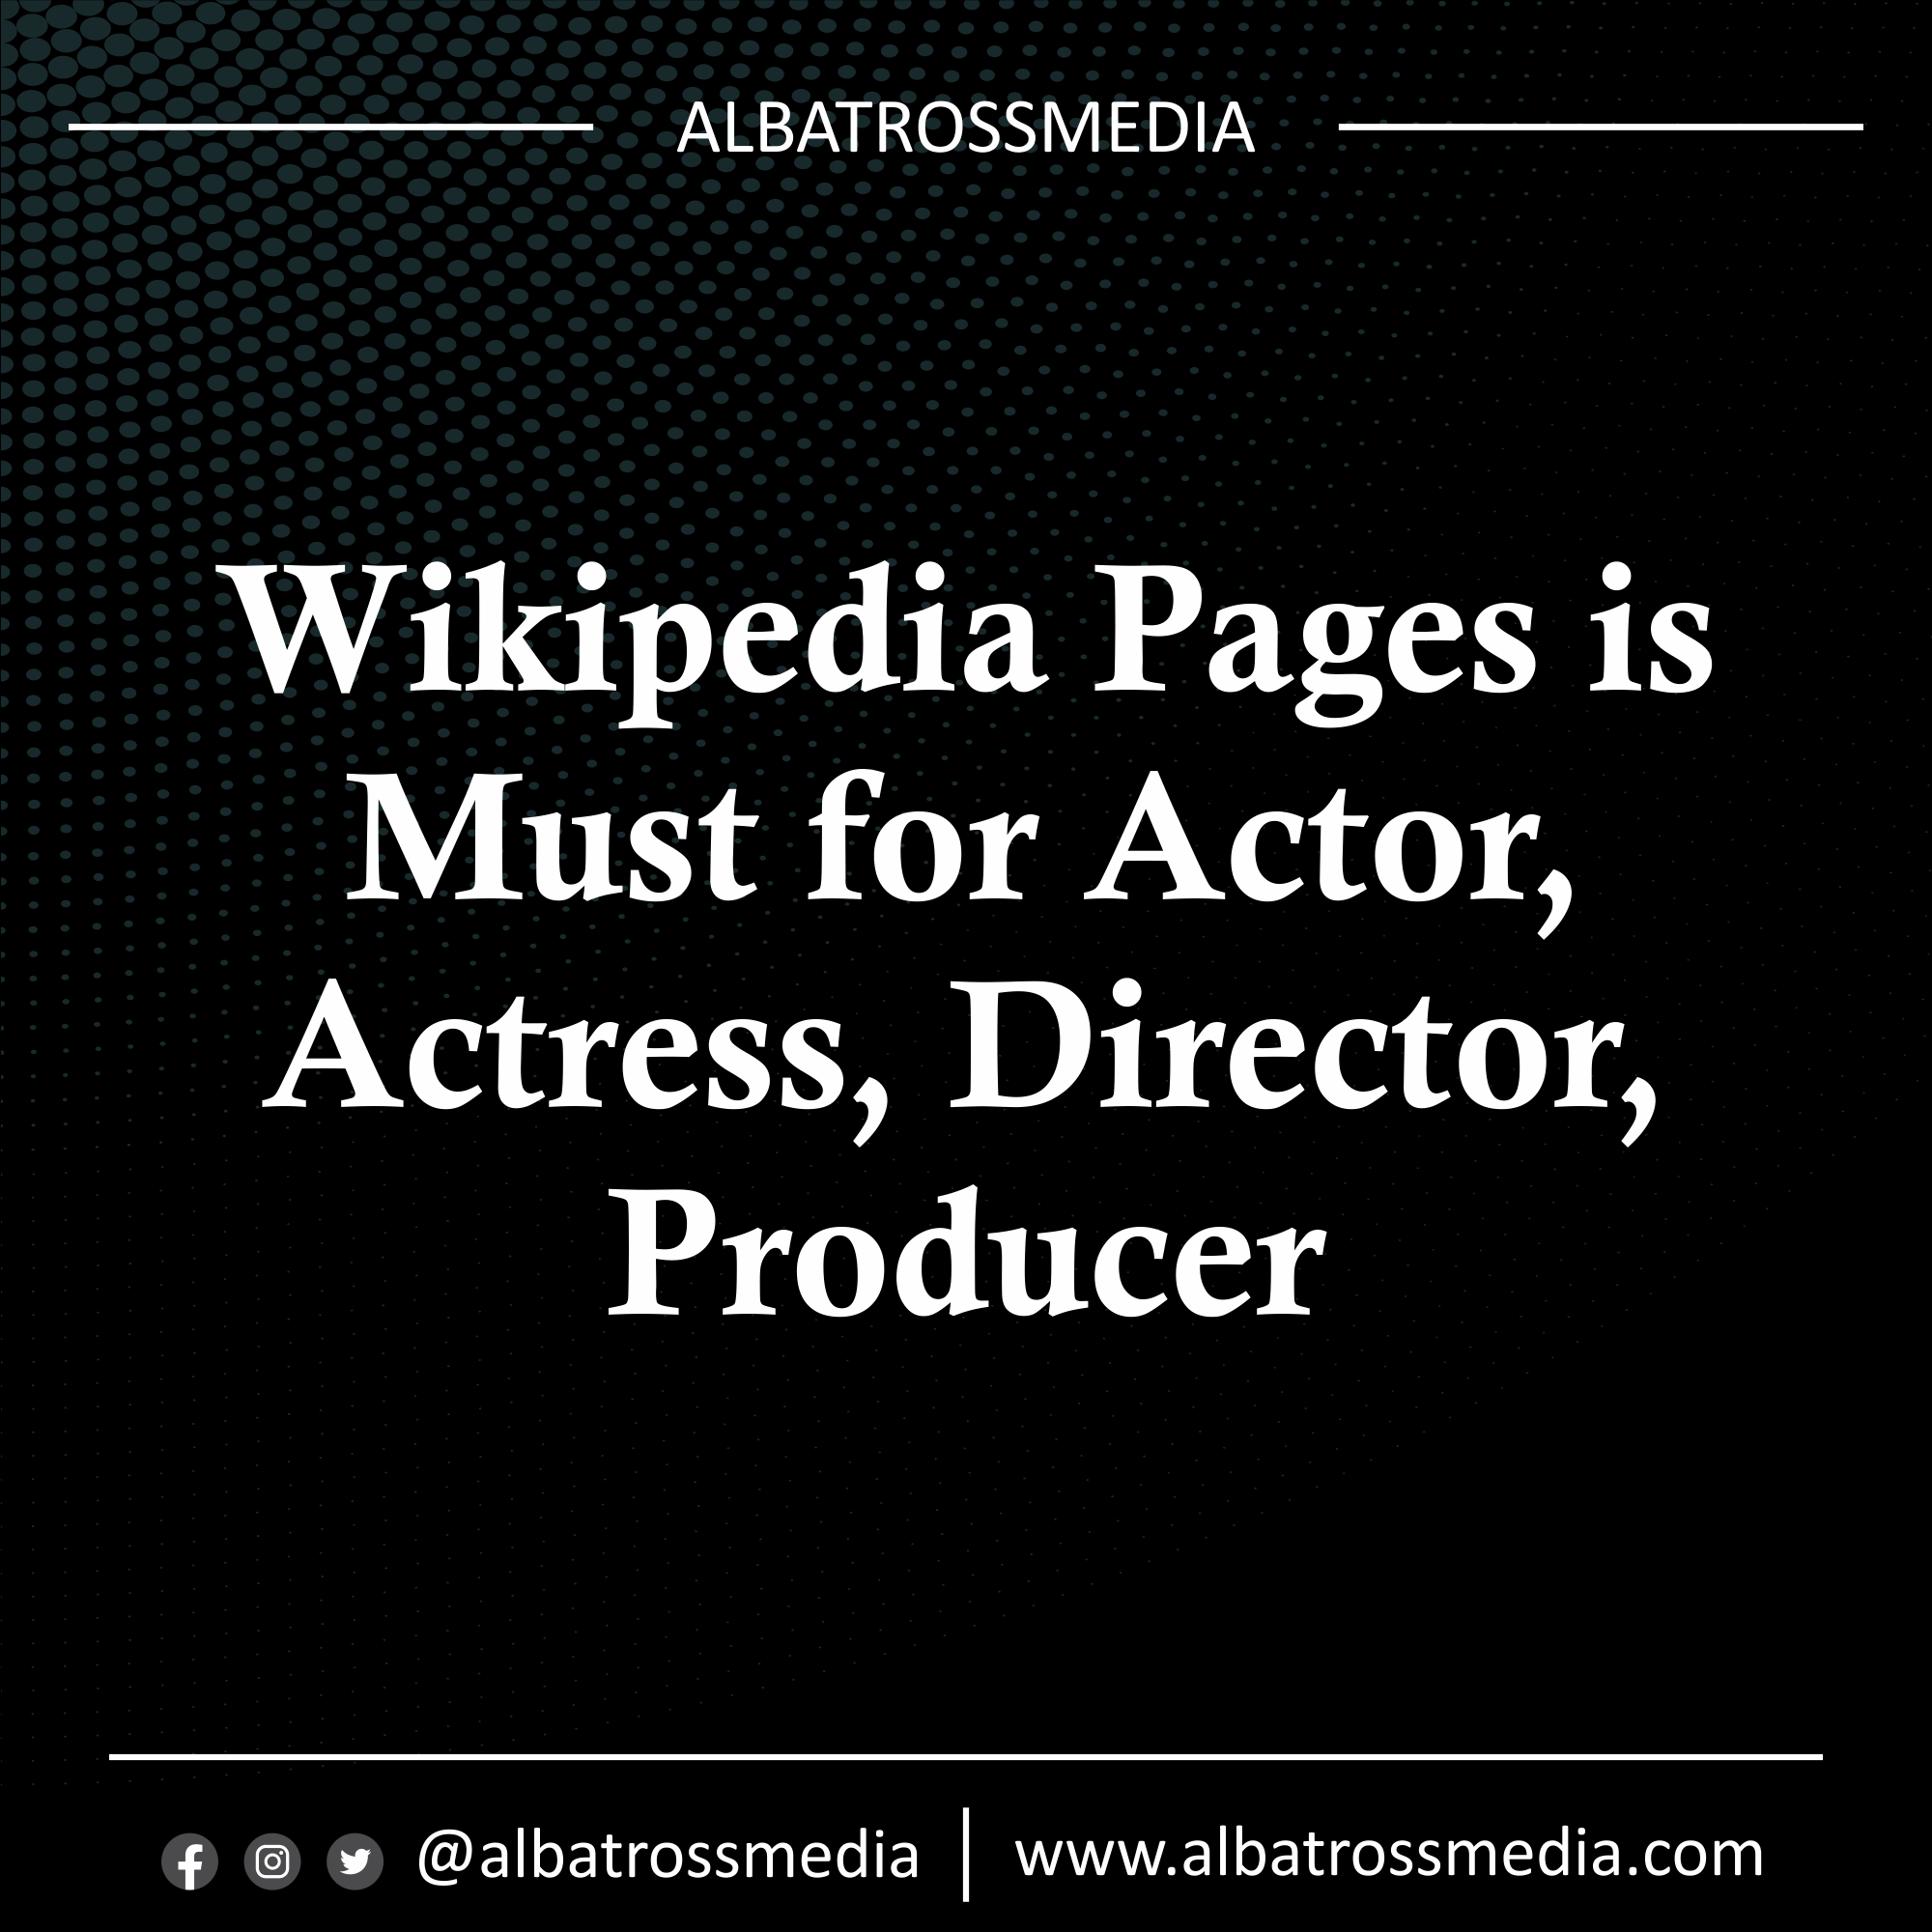 Wikipedia Pages is Must for Actor, Actress, Director, Producer